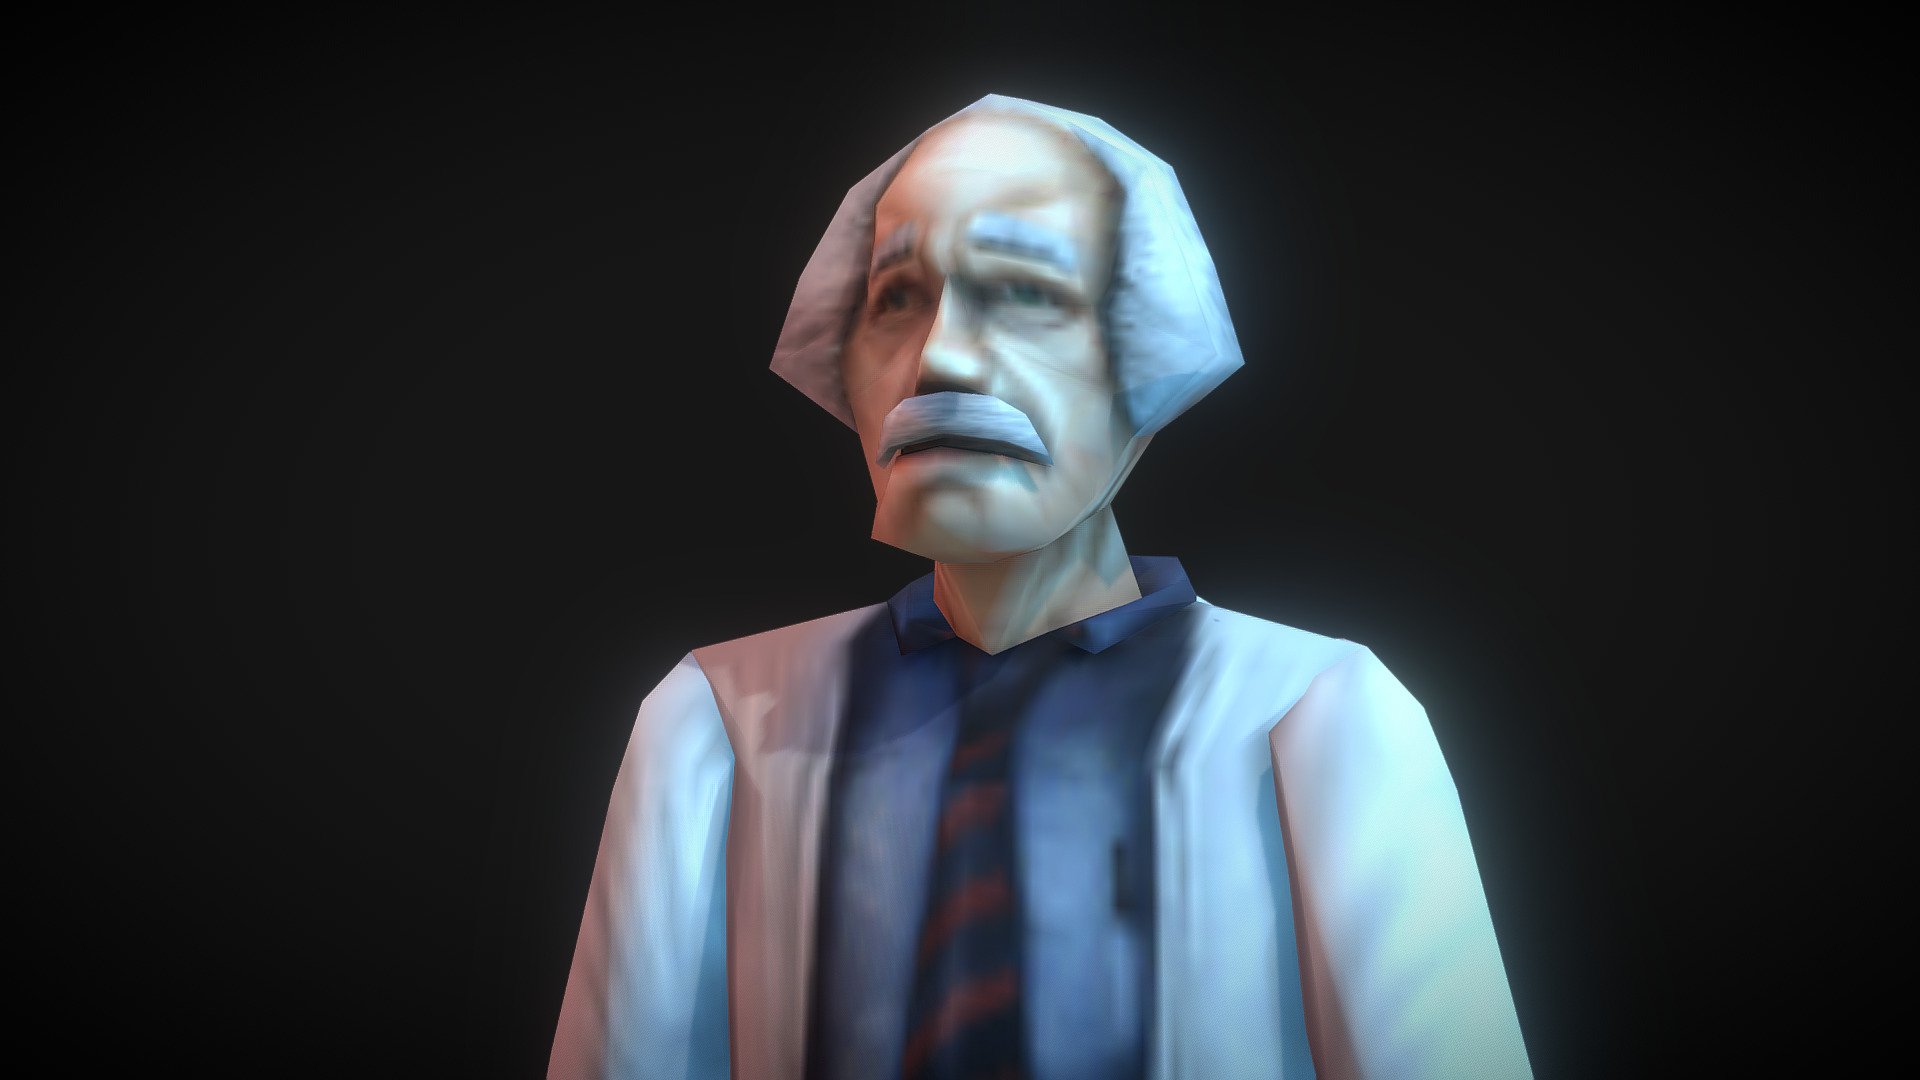 Einstein is one of the many scientist you can see in Half-Life, he is part of the science team with his buddies, slick, luther, and walter/nerd 3d model